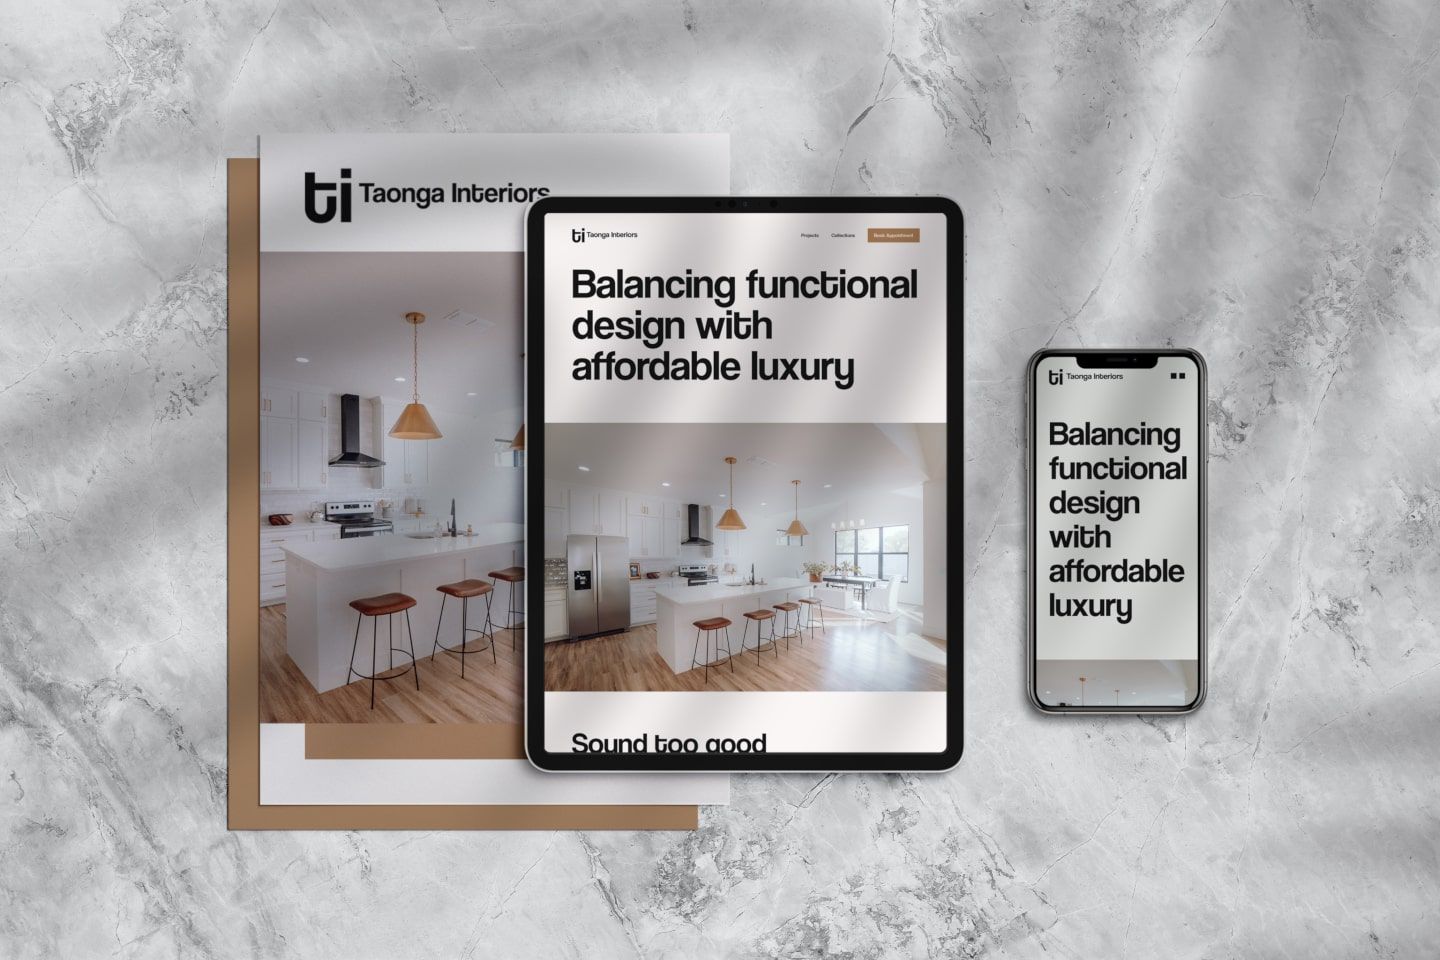 Taonga Interiors project mockup: branding leaflet and home page banner view on tablet and iphone